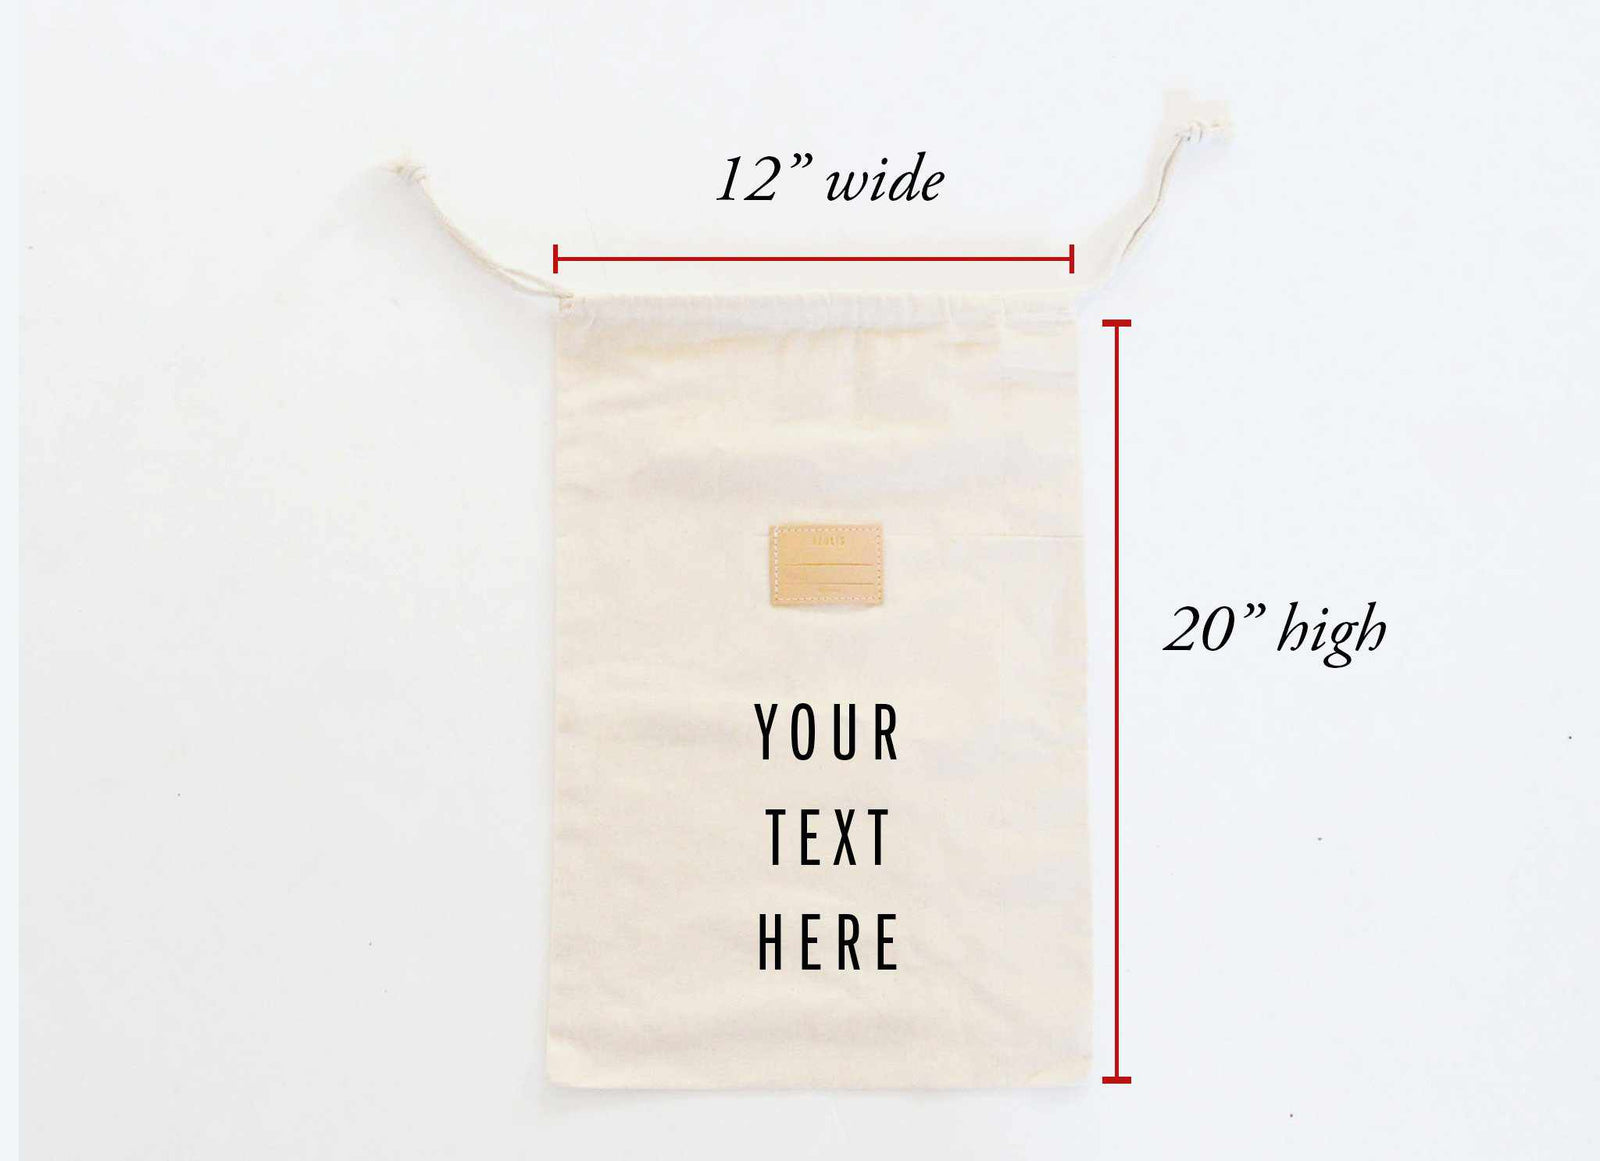 Customize Your Reusable Cloth Pouch